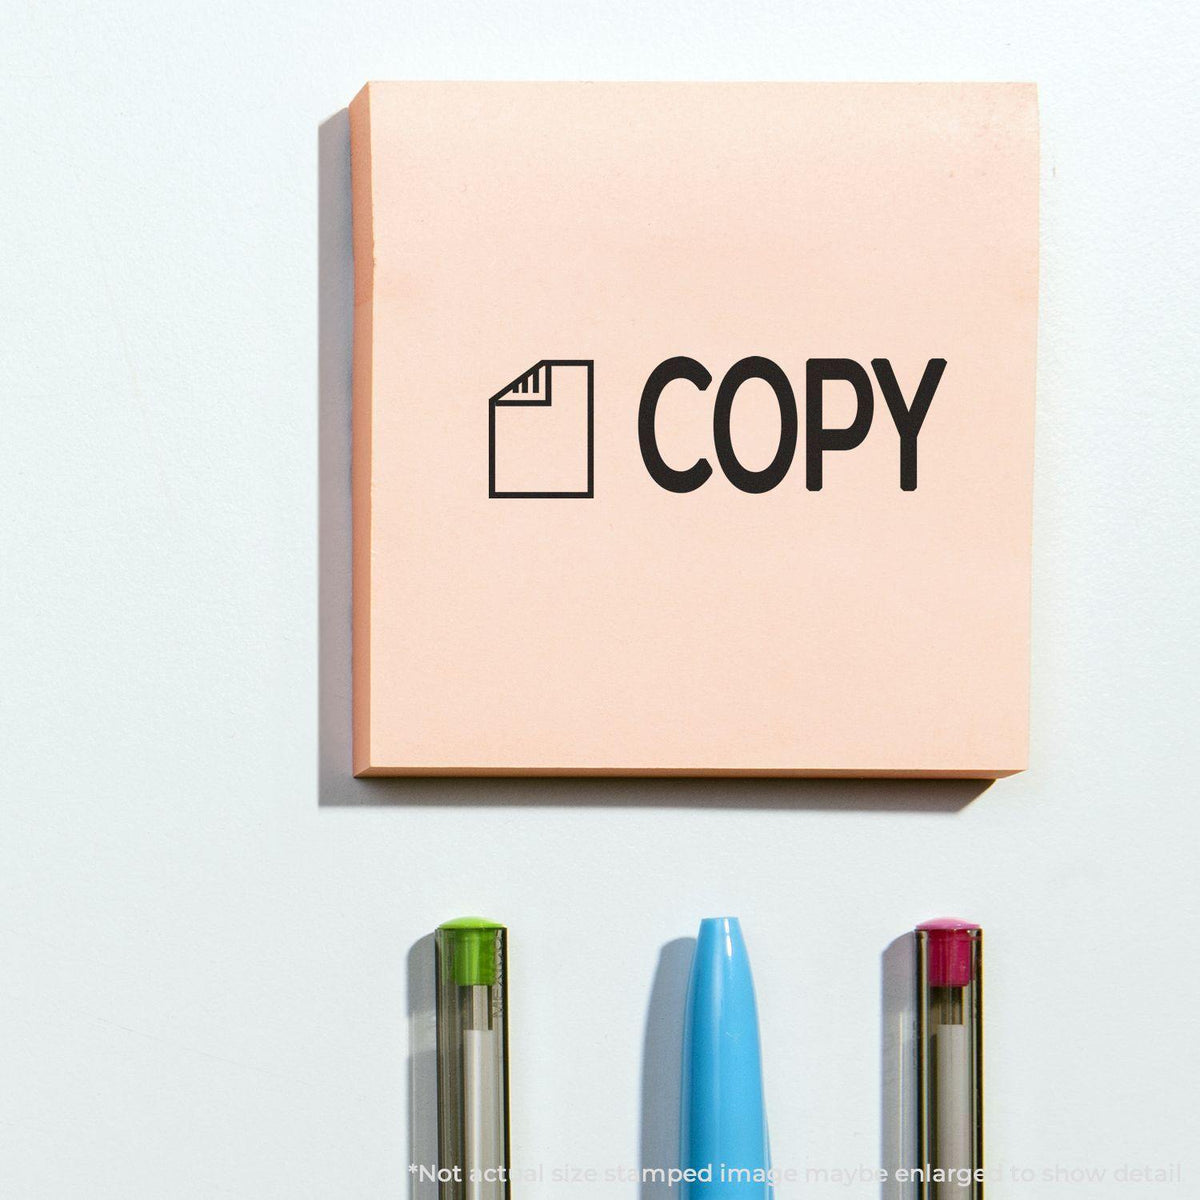 In Use Copy with Letter Rubber Stamp Image